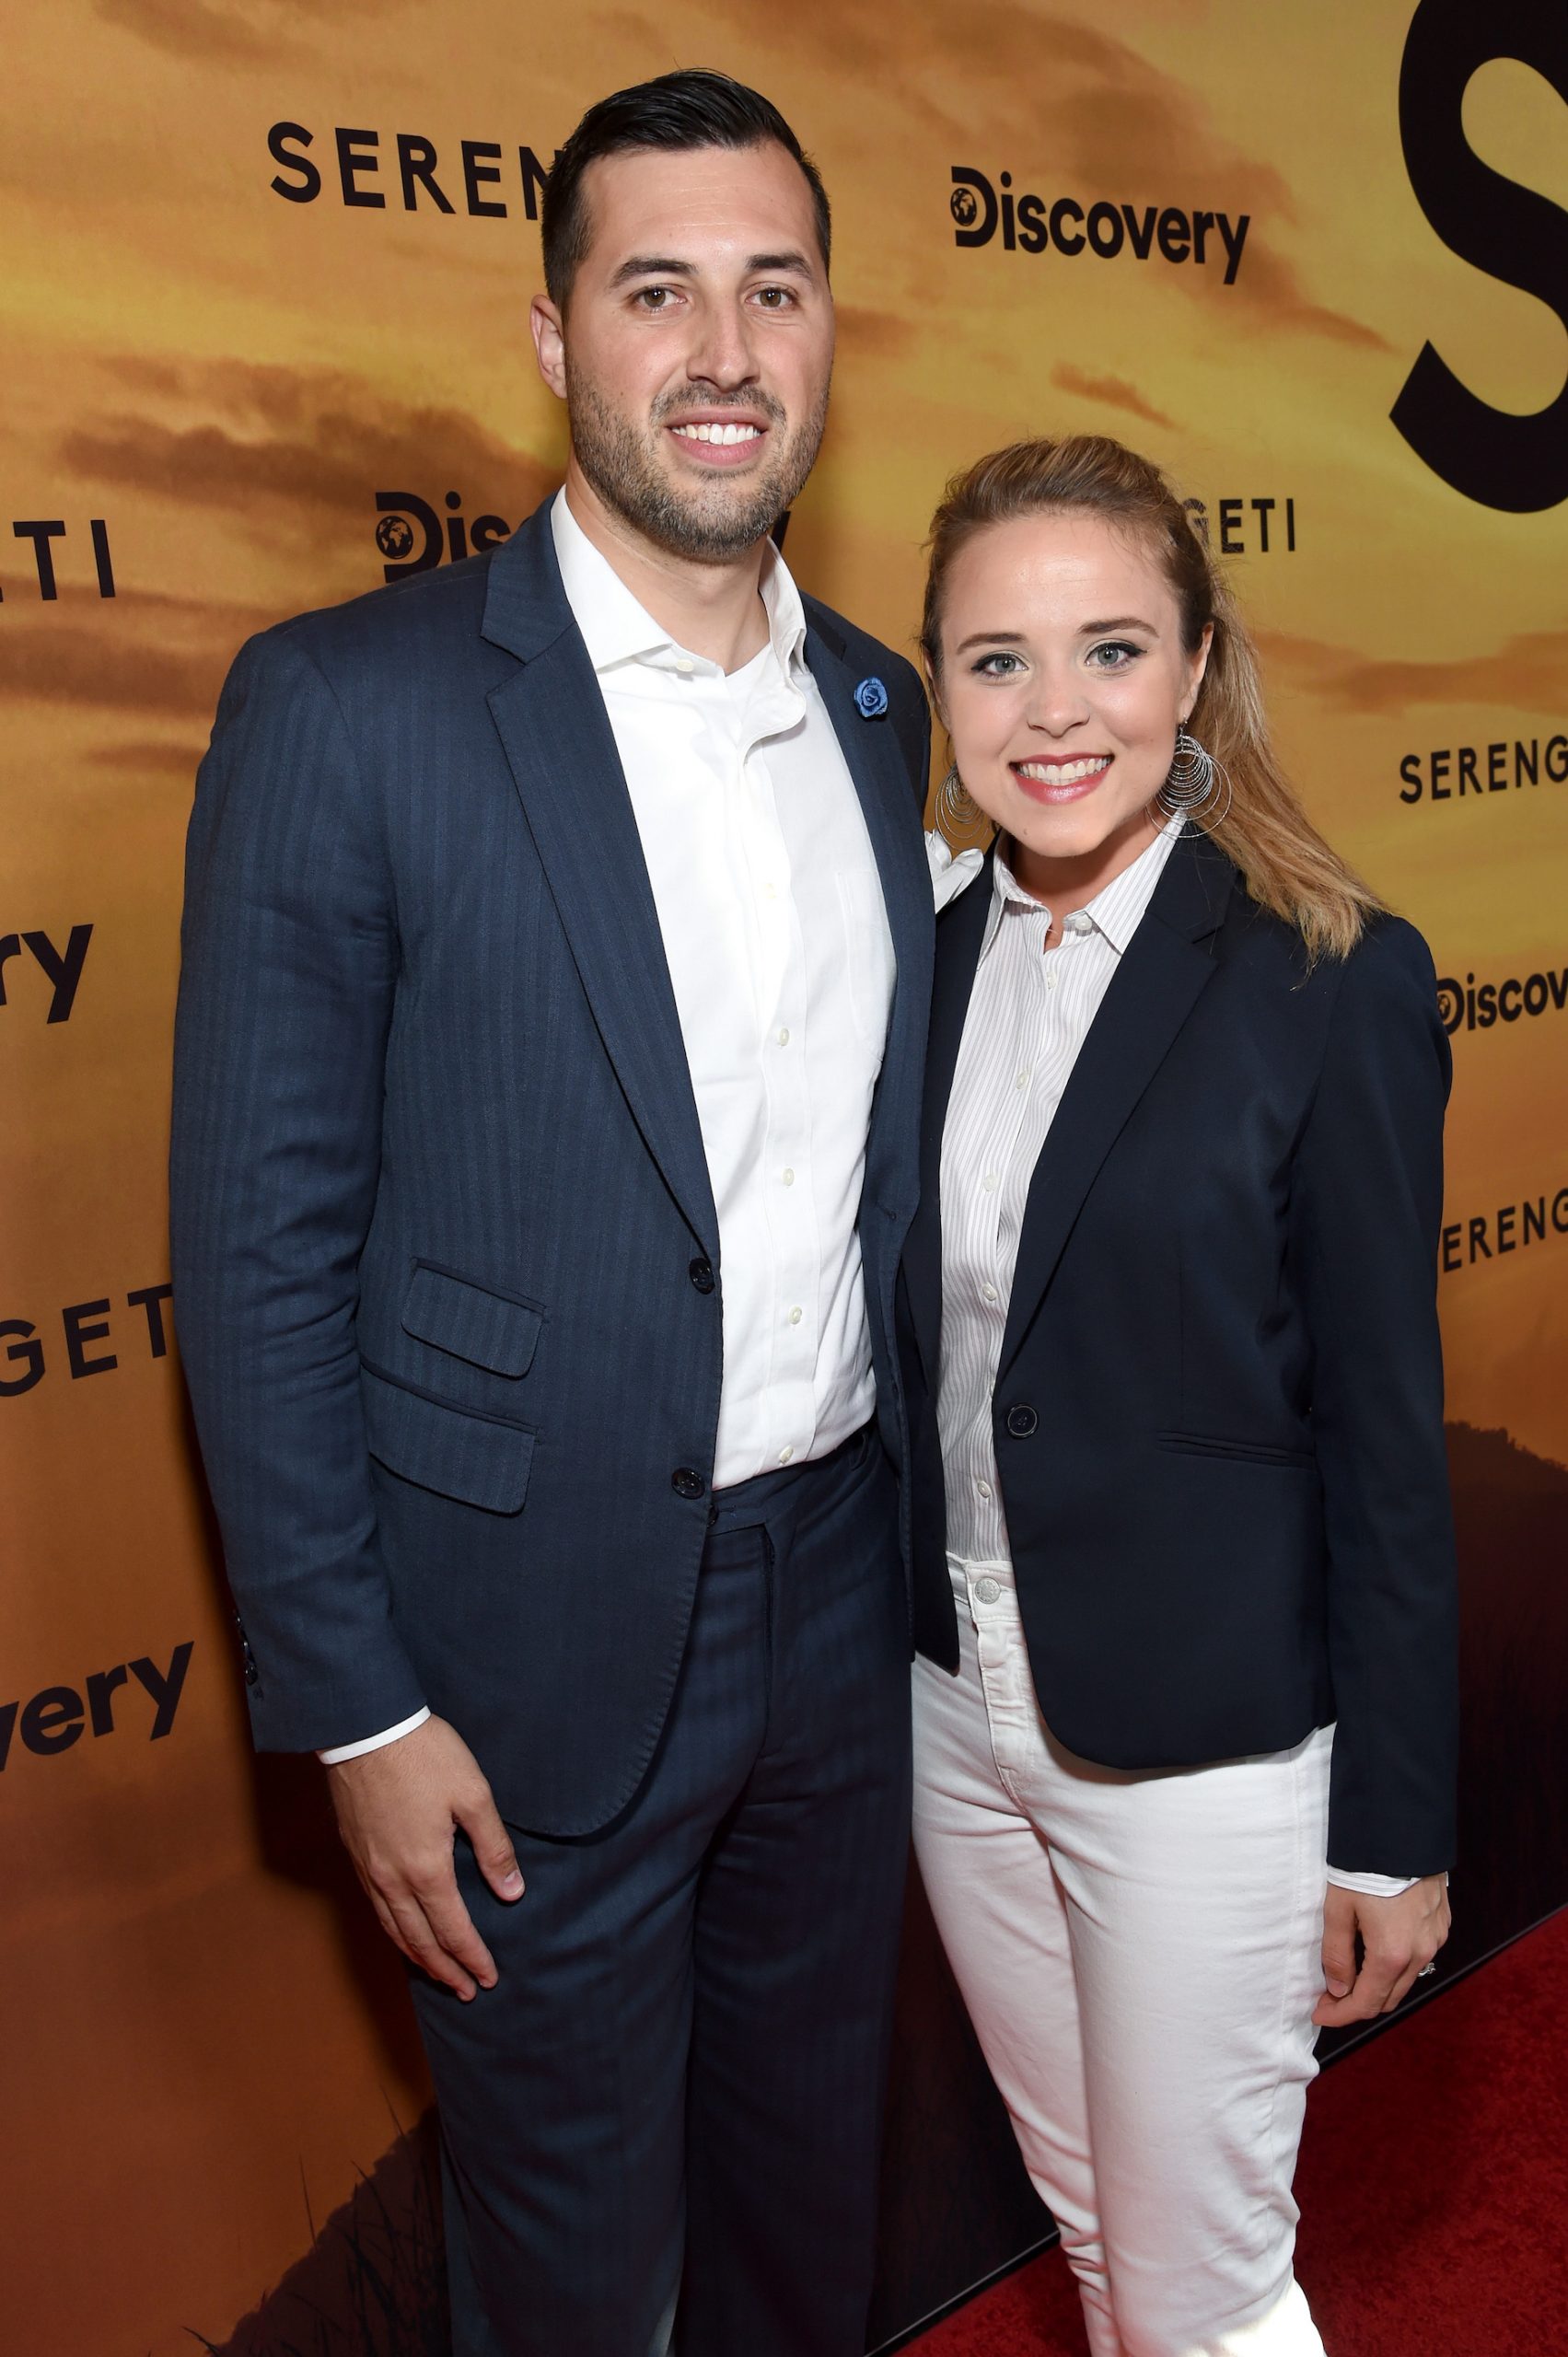 JInger Duggar, wearing white pants, poses with her husband Jeremy Vuolo at a Discovery event 